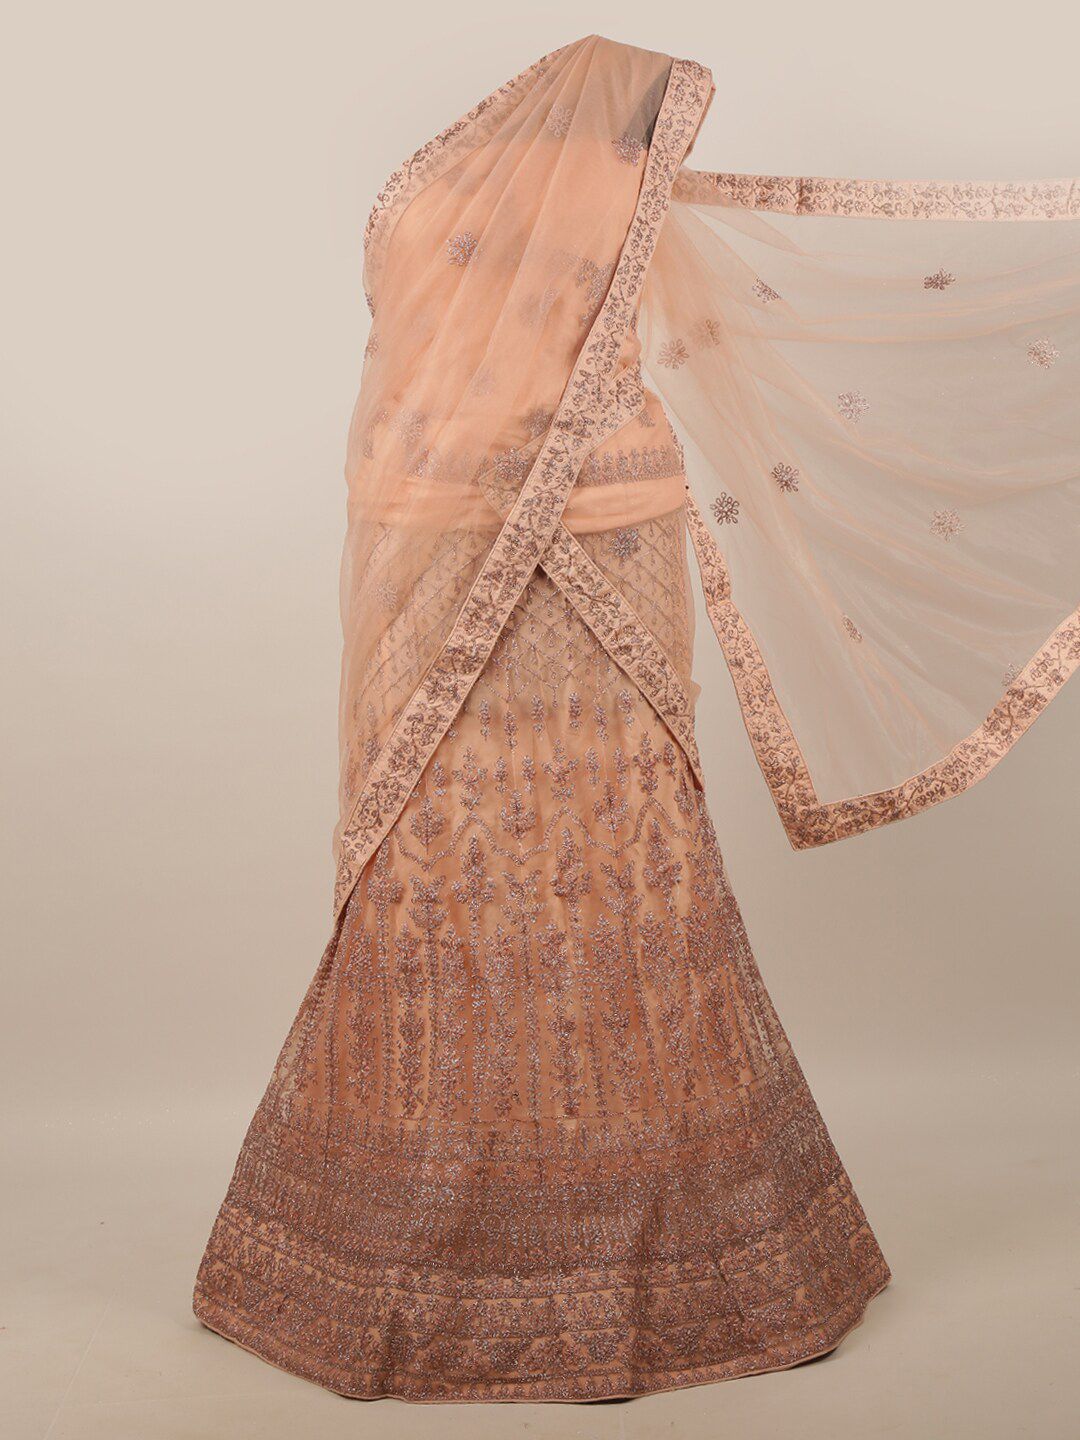 Pothys Peach-Coloured & Silver Embroidered Unstitched Lehenga & Blouse With Dupatta Price in India